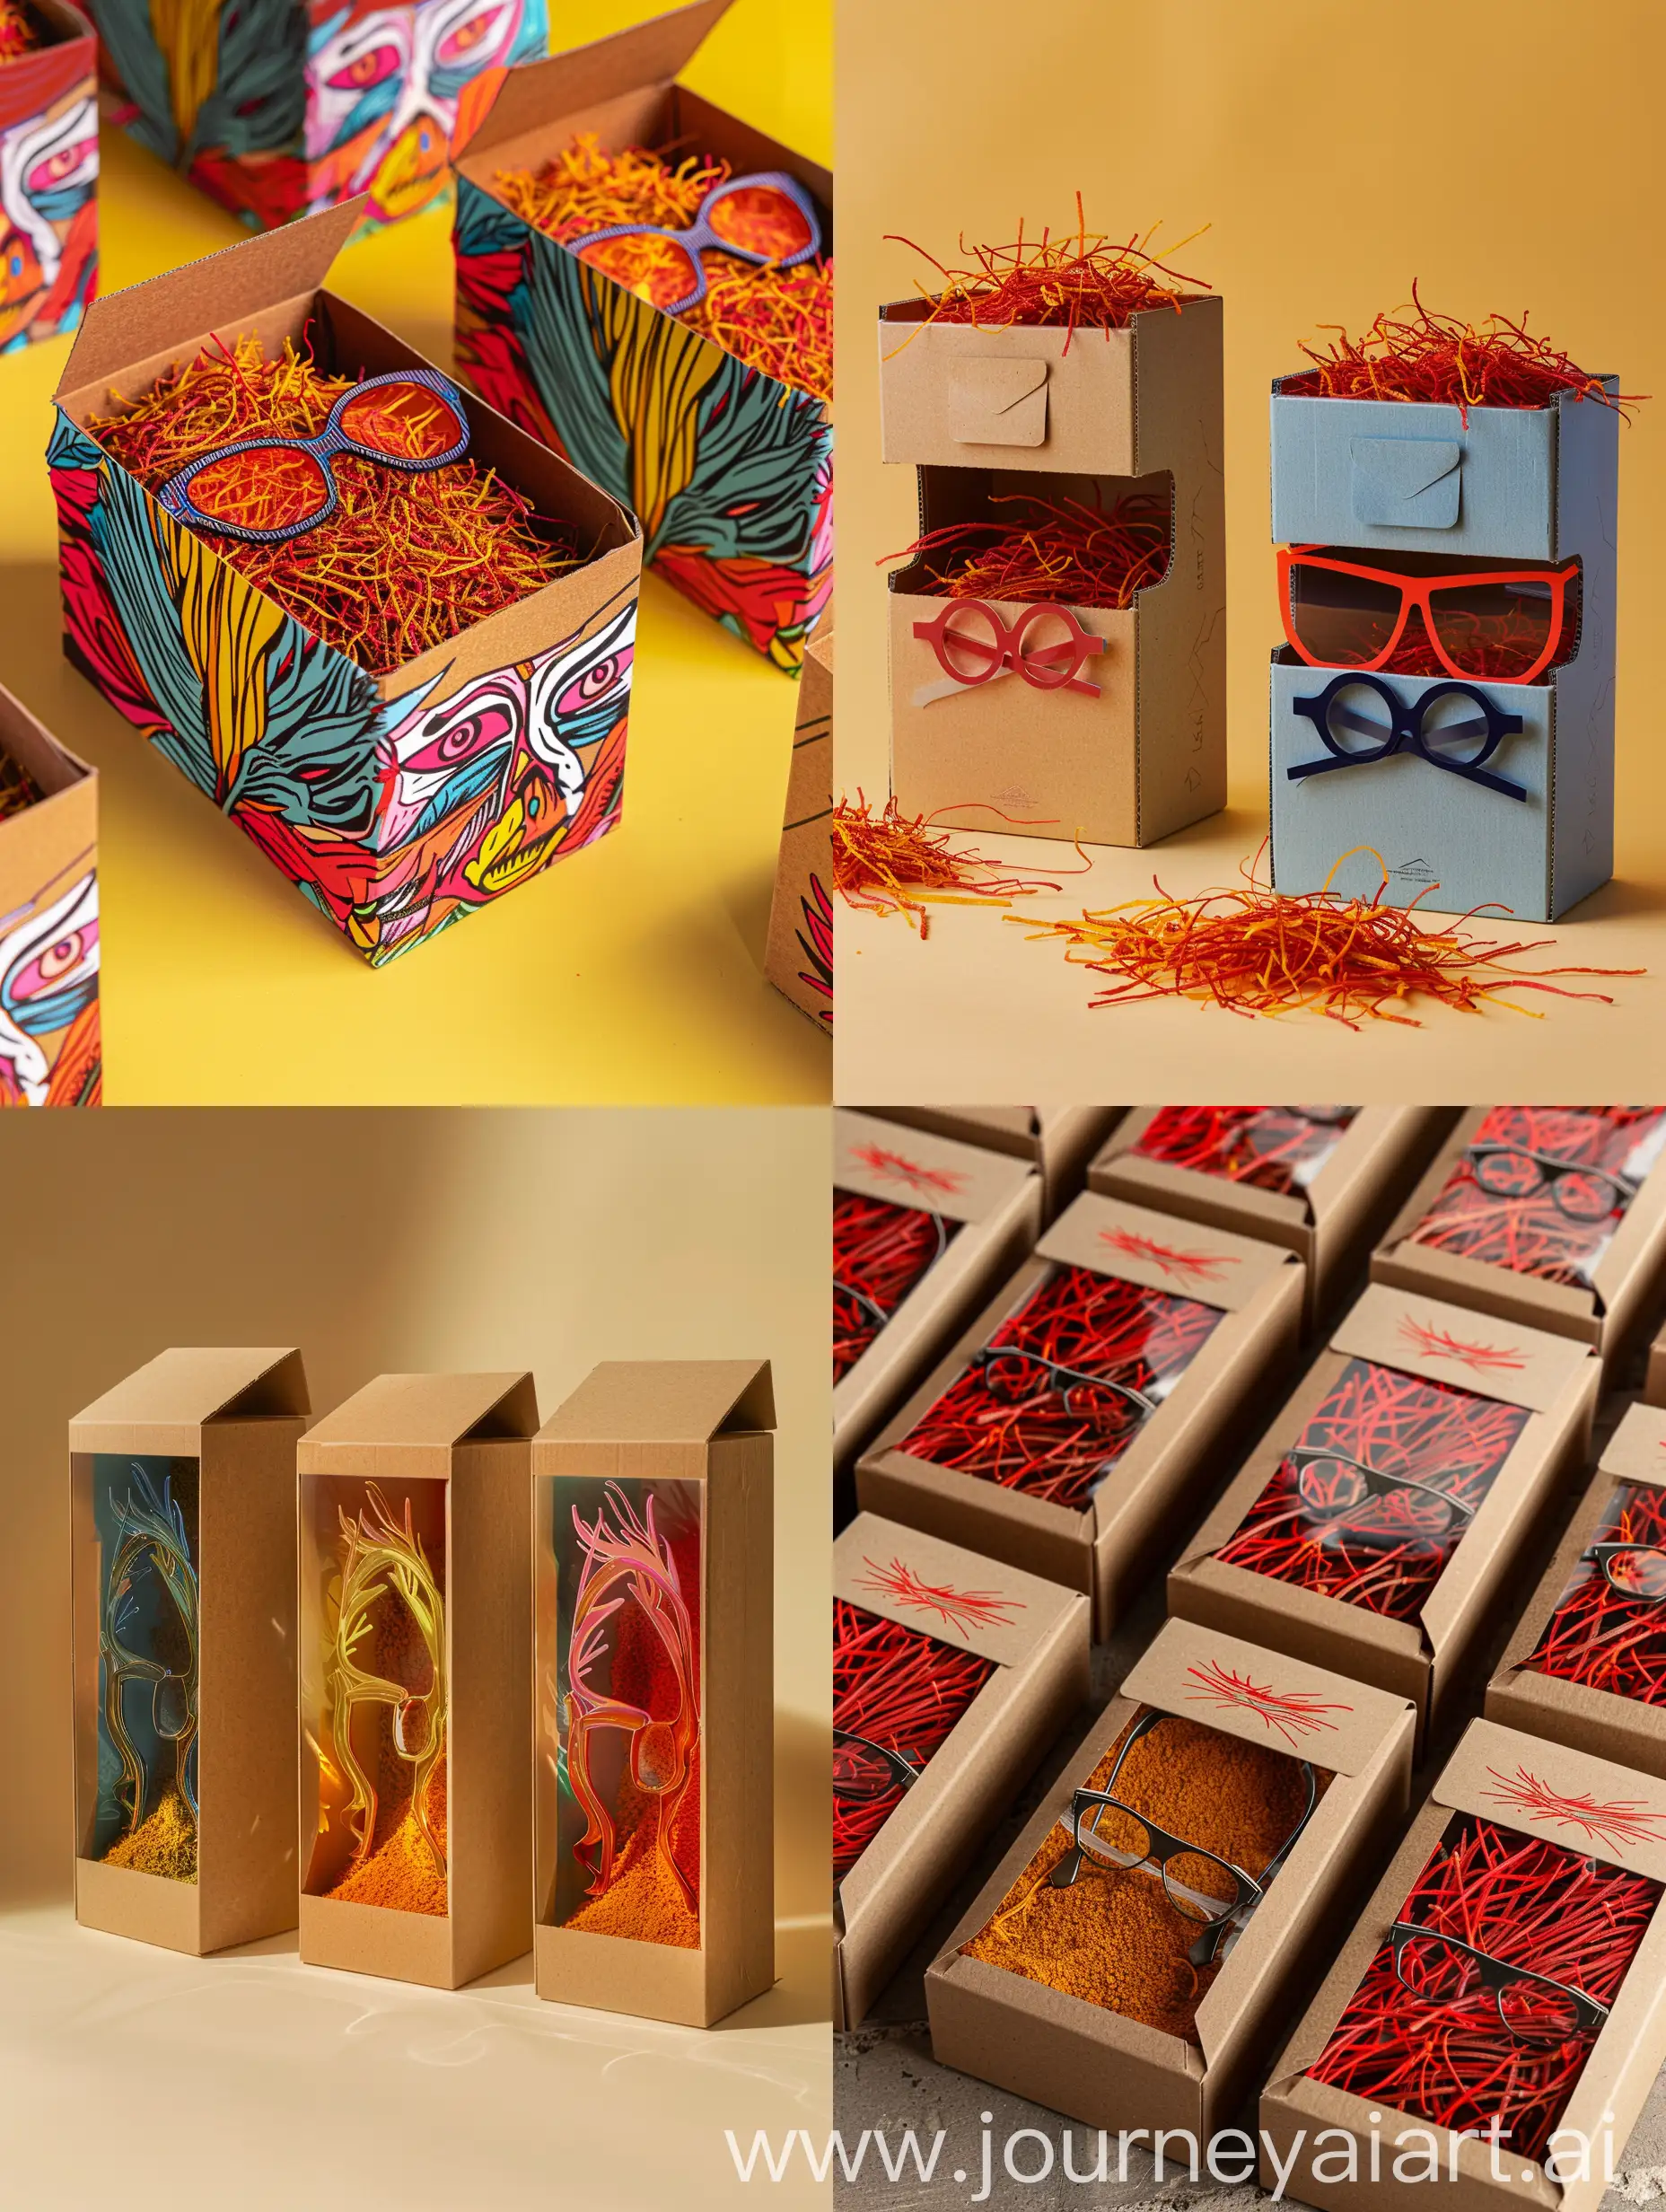 Surreal-Saffron-Packaging-with-Mythical-Glasses-Realistic-and-EyeCatching-Cardboard-Boxes